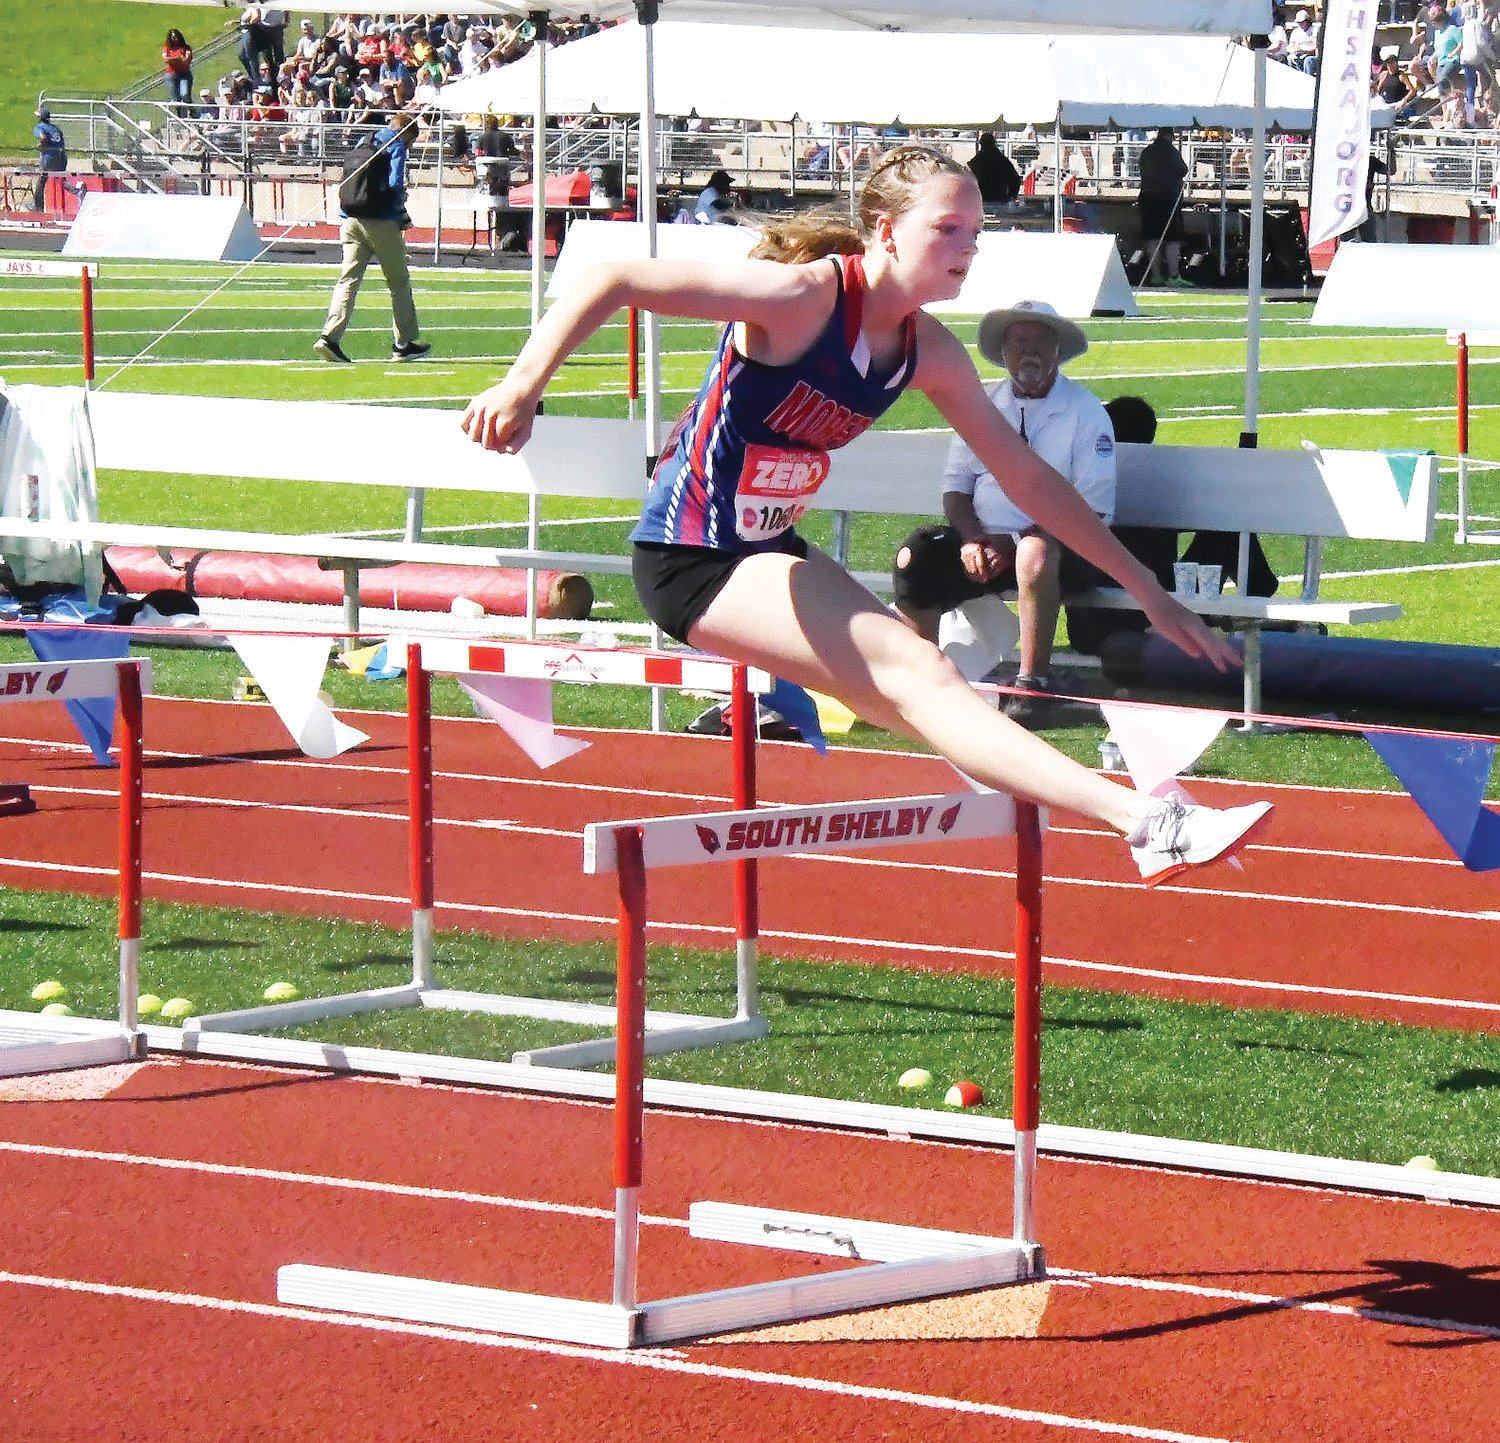 Moberly freshman Zoey Hannam strides over the bar during the 300-meter hurdles preliminaries on Friday afternoon at the Missouri Class 4 state meet in Jefferson City. Hannam recorded a time of 48.16 seconds, which was just 0.11 off qualifying for the finals.